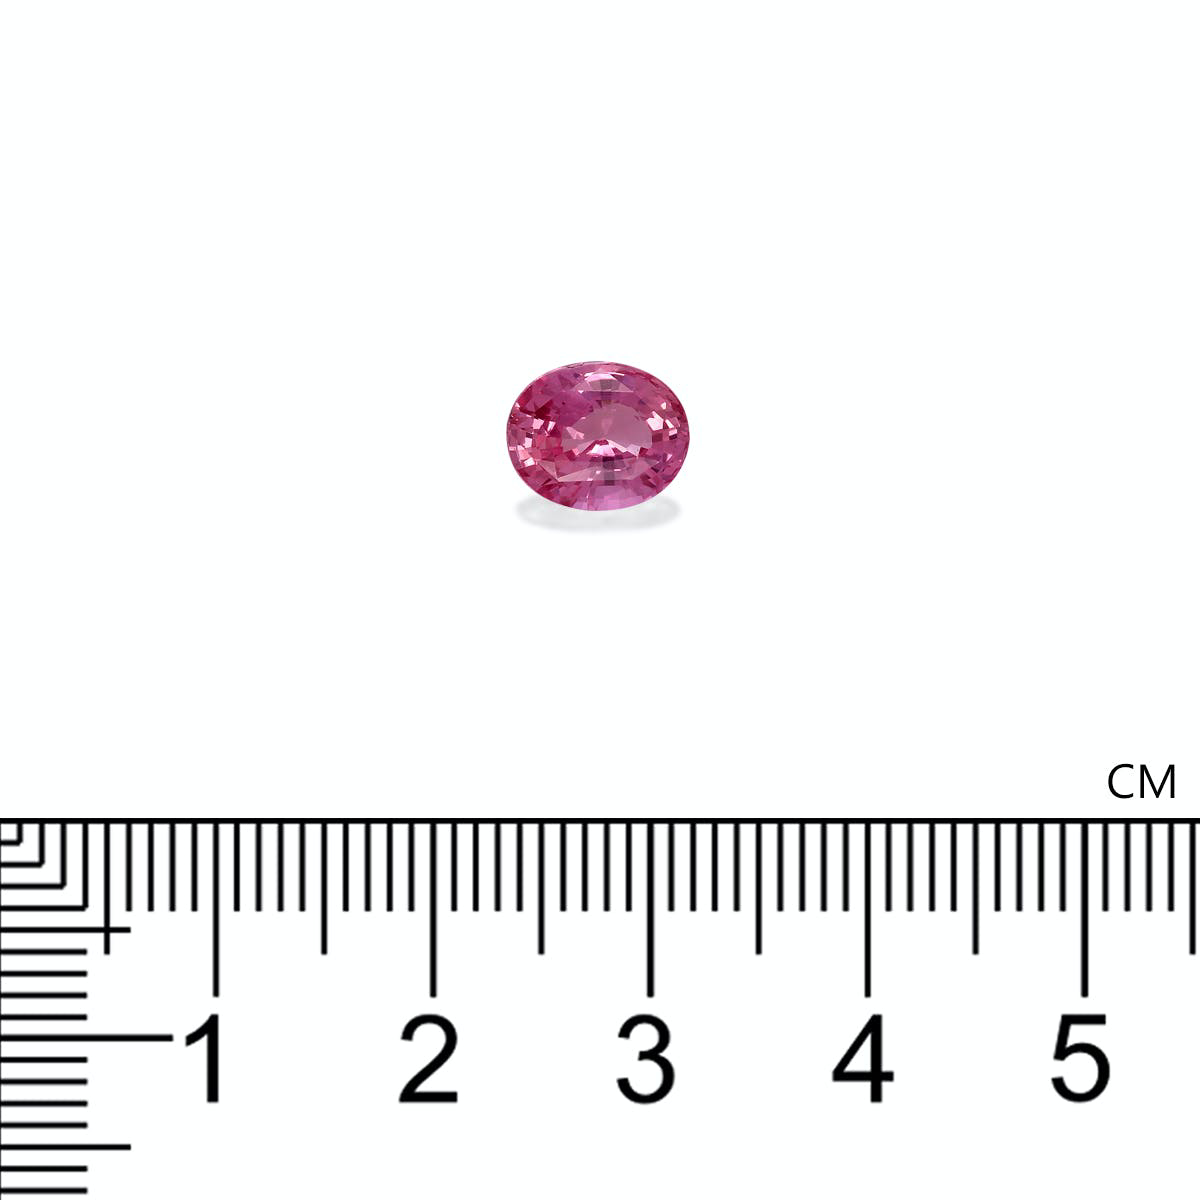 Picture of Pink Padparadscha Sapphire 2.04ct - 8x6mm (PP0020)